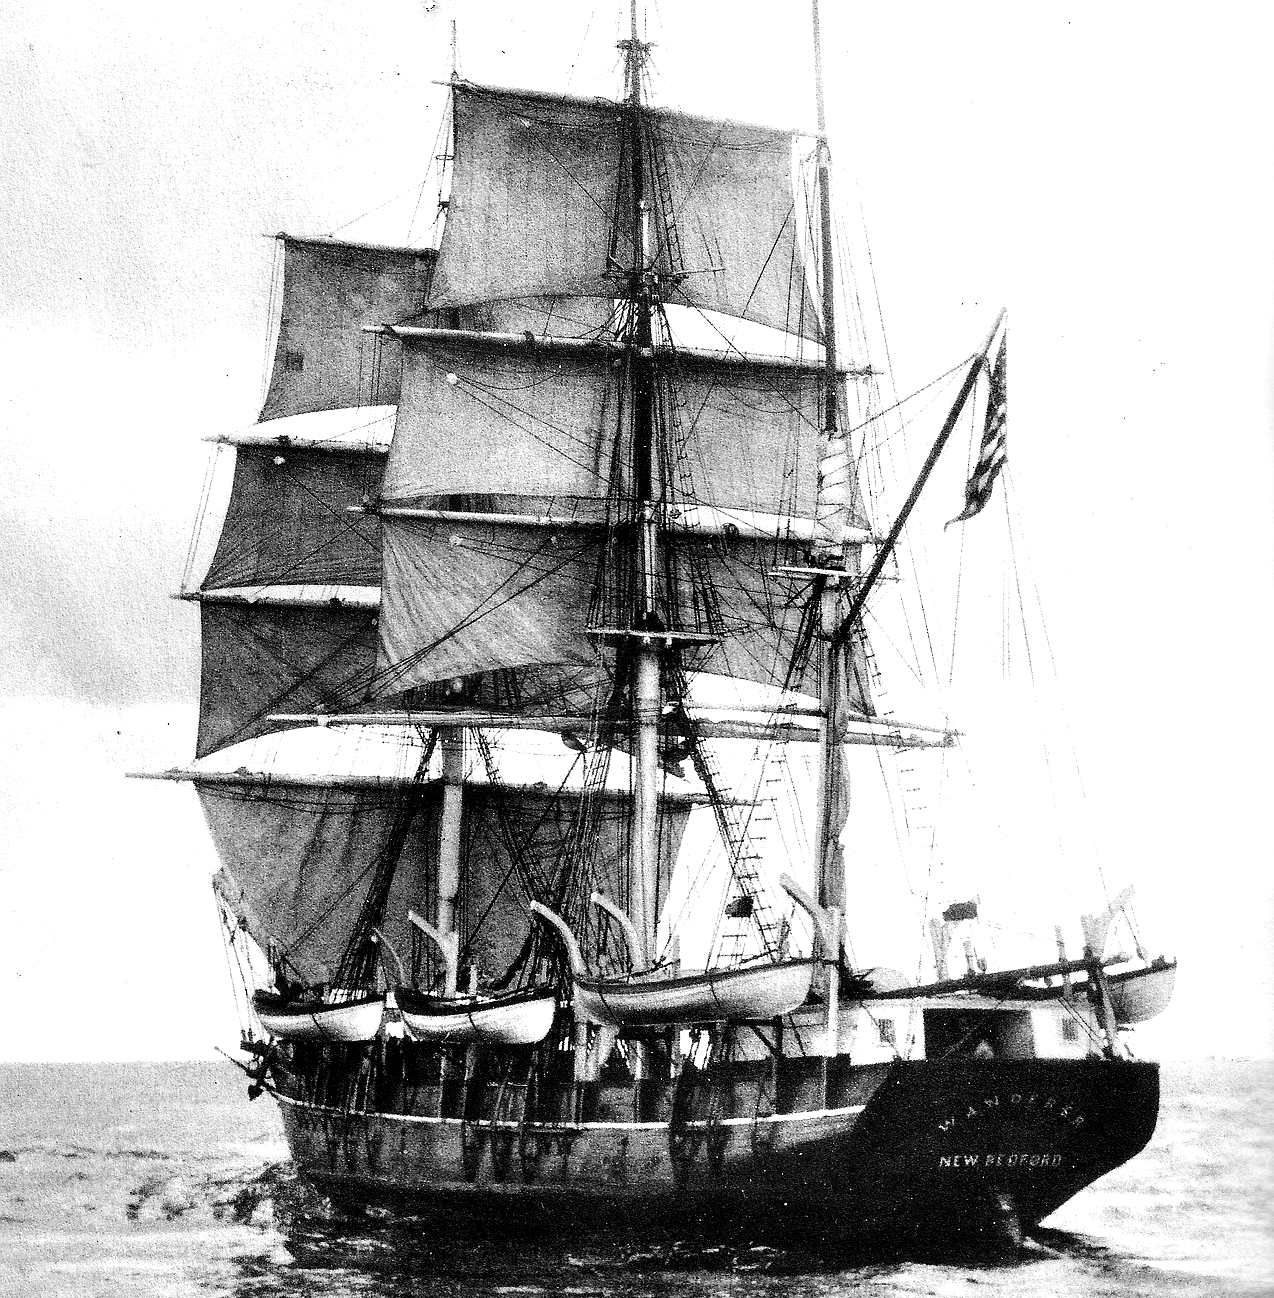 The Essex, three mast whaling ship sunk in 1820